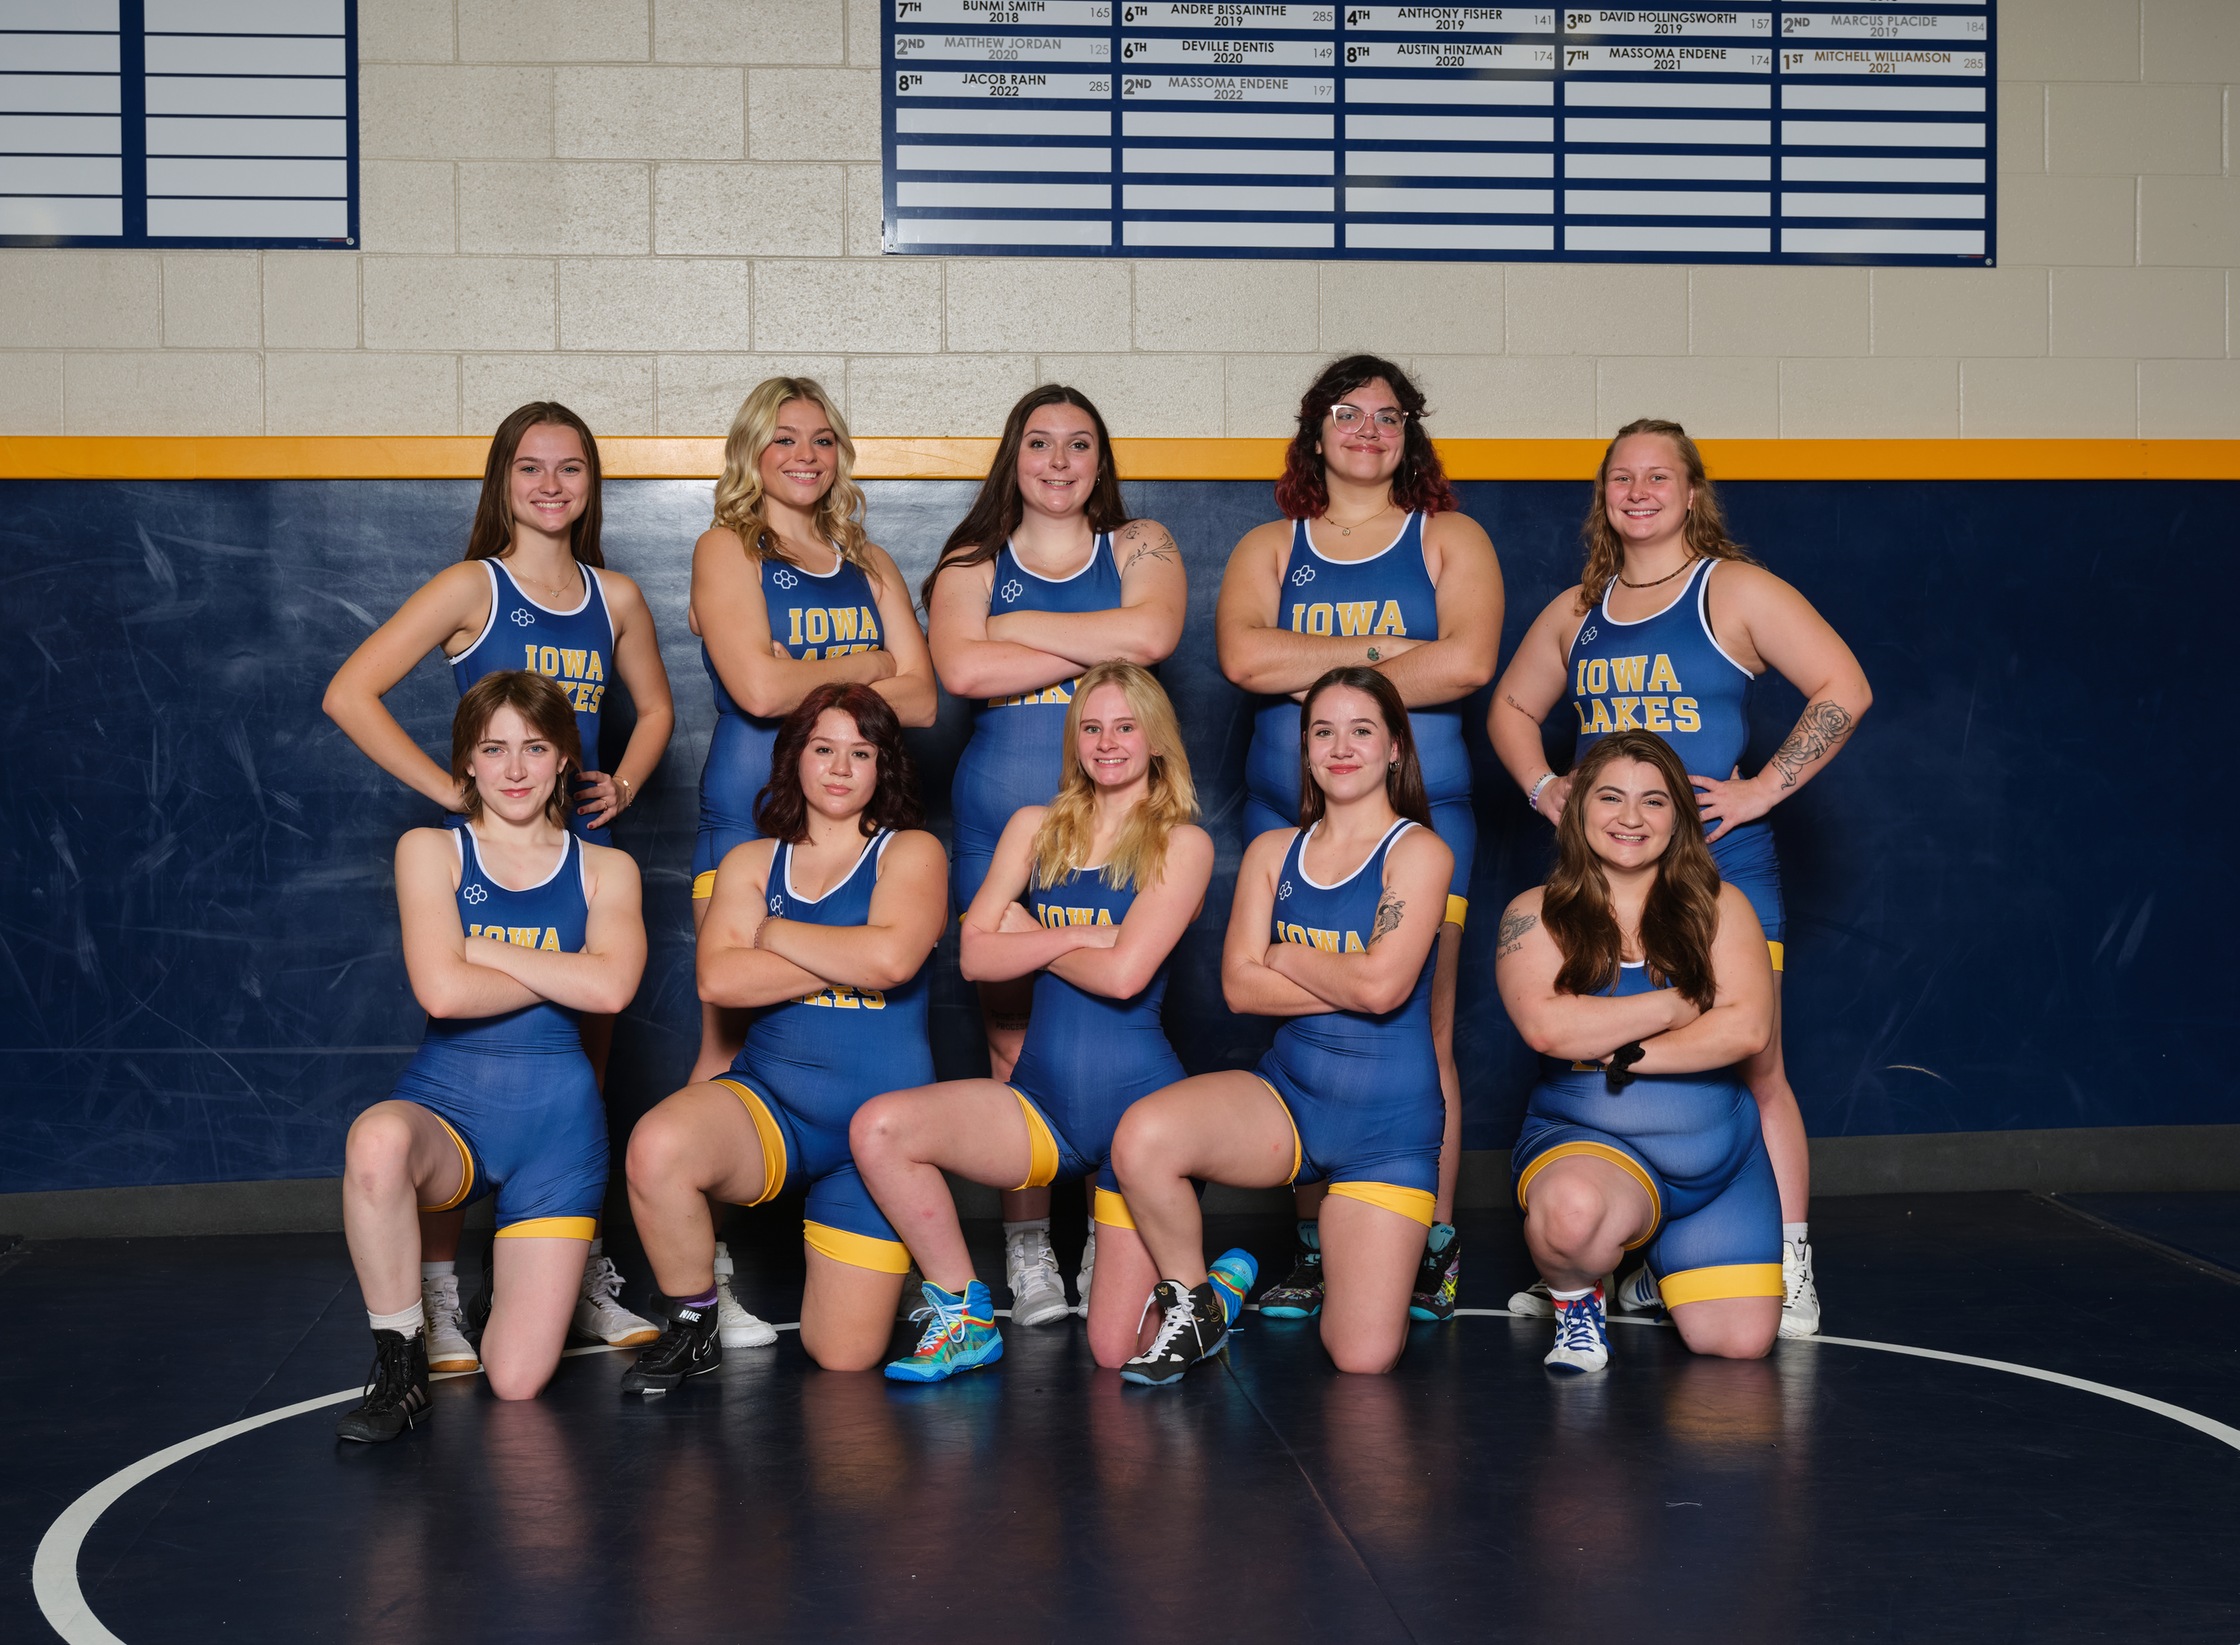 Iowa Lakes Women's Wrestling Makes History With First Competition